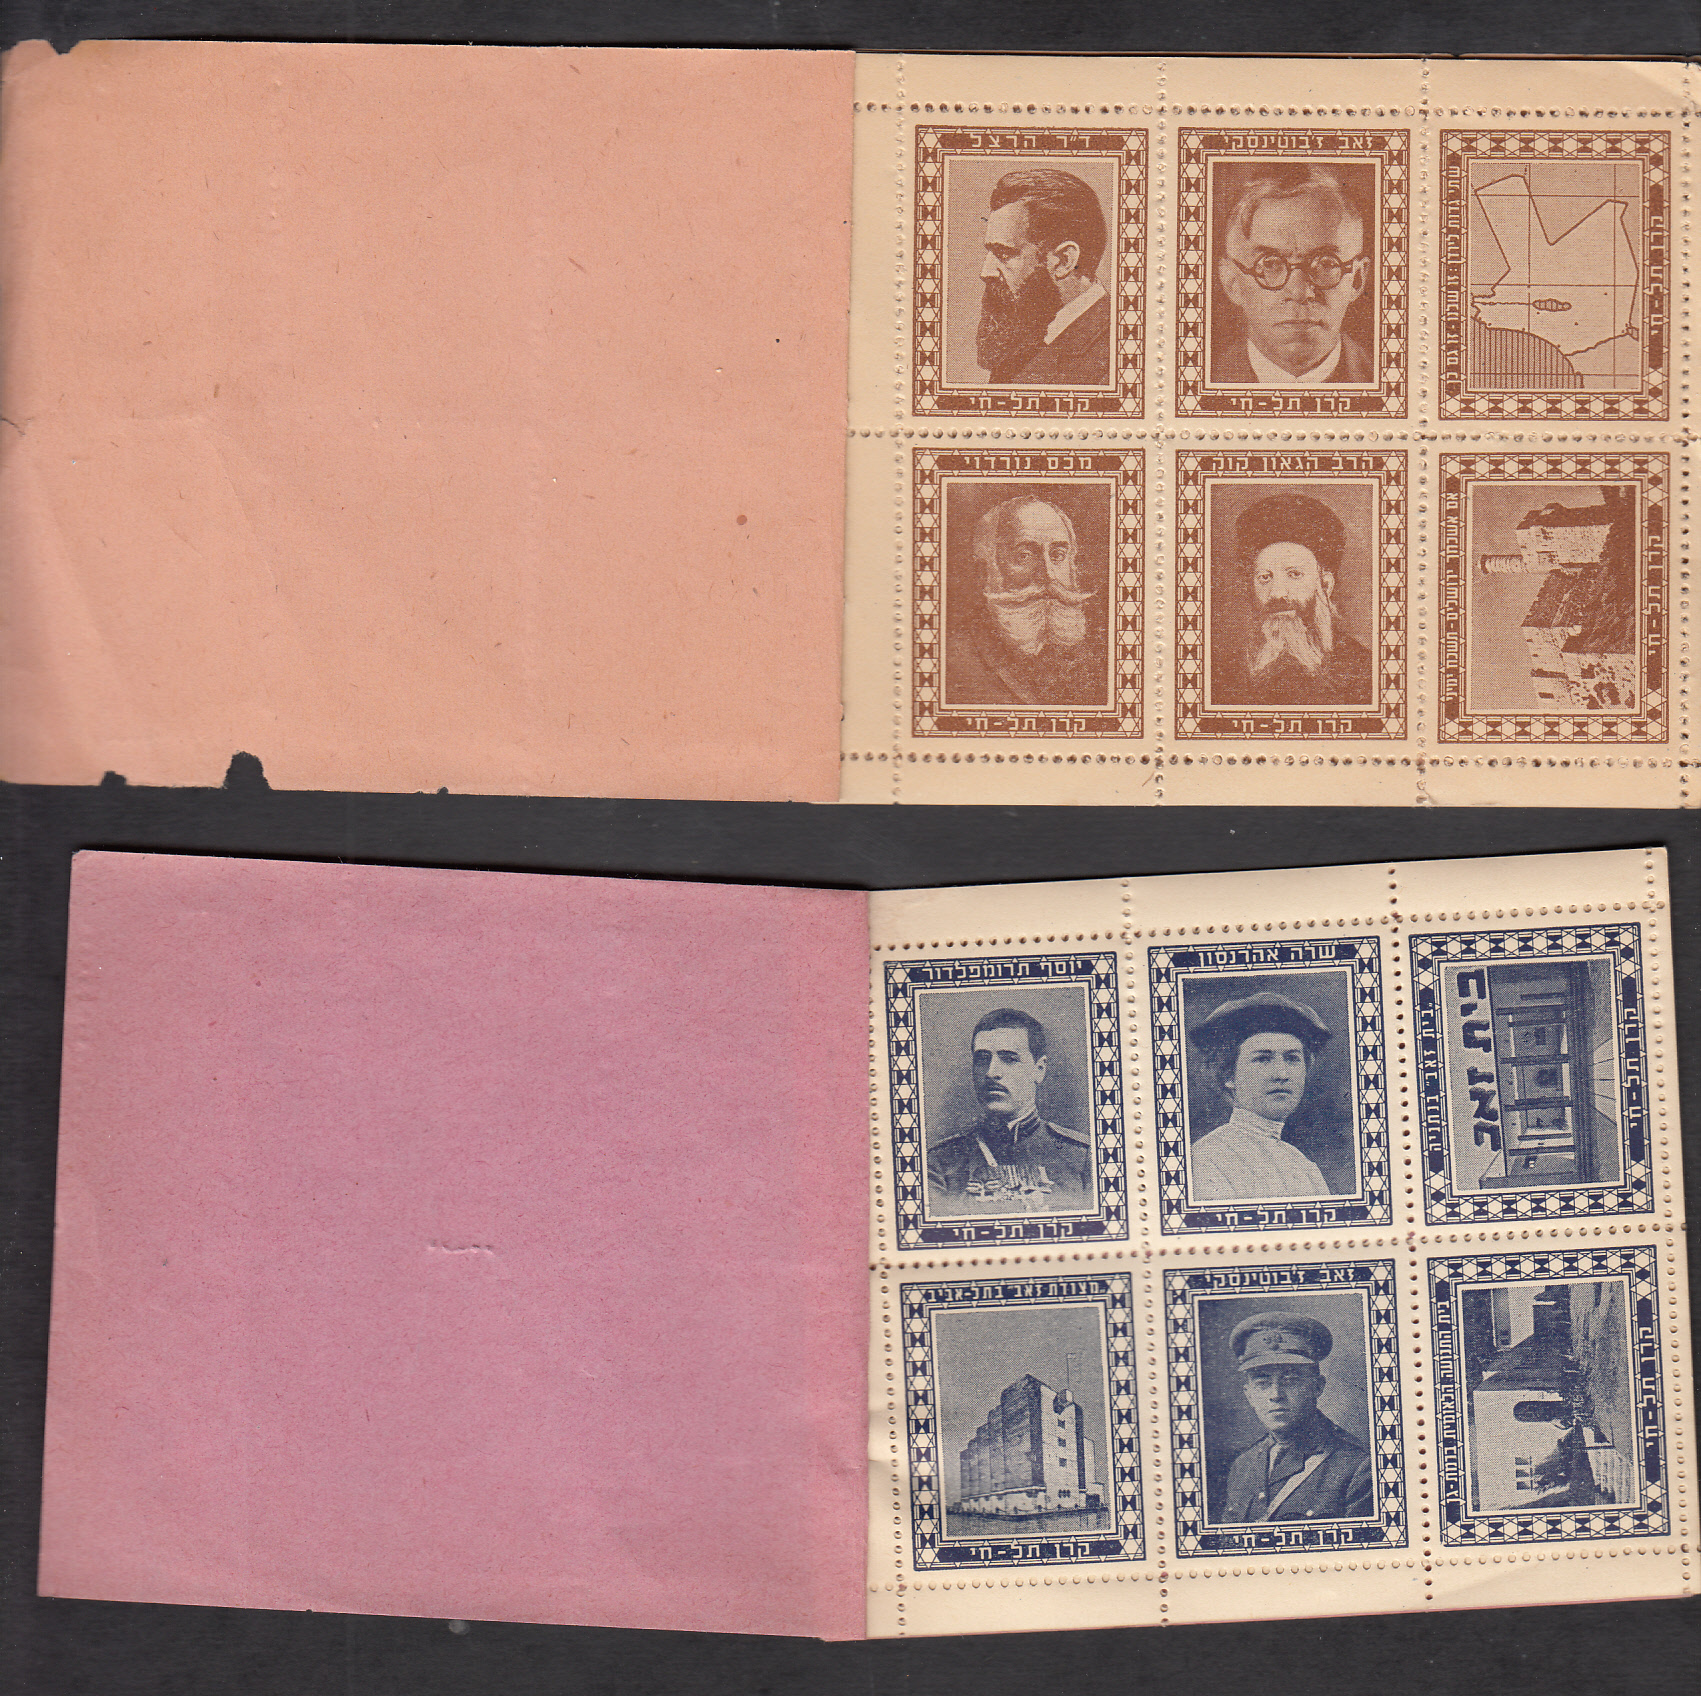 Lot 290 - Judaica, Holocaust, Anti Semitic, Autographs & related material  -  Doron Waide Mail Auction #40